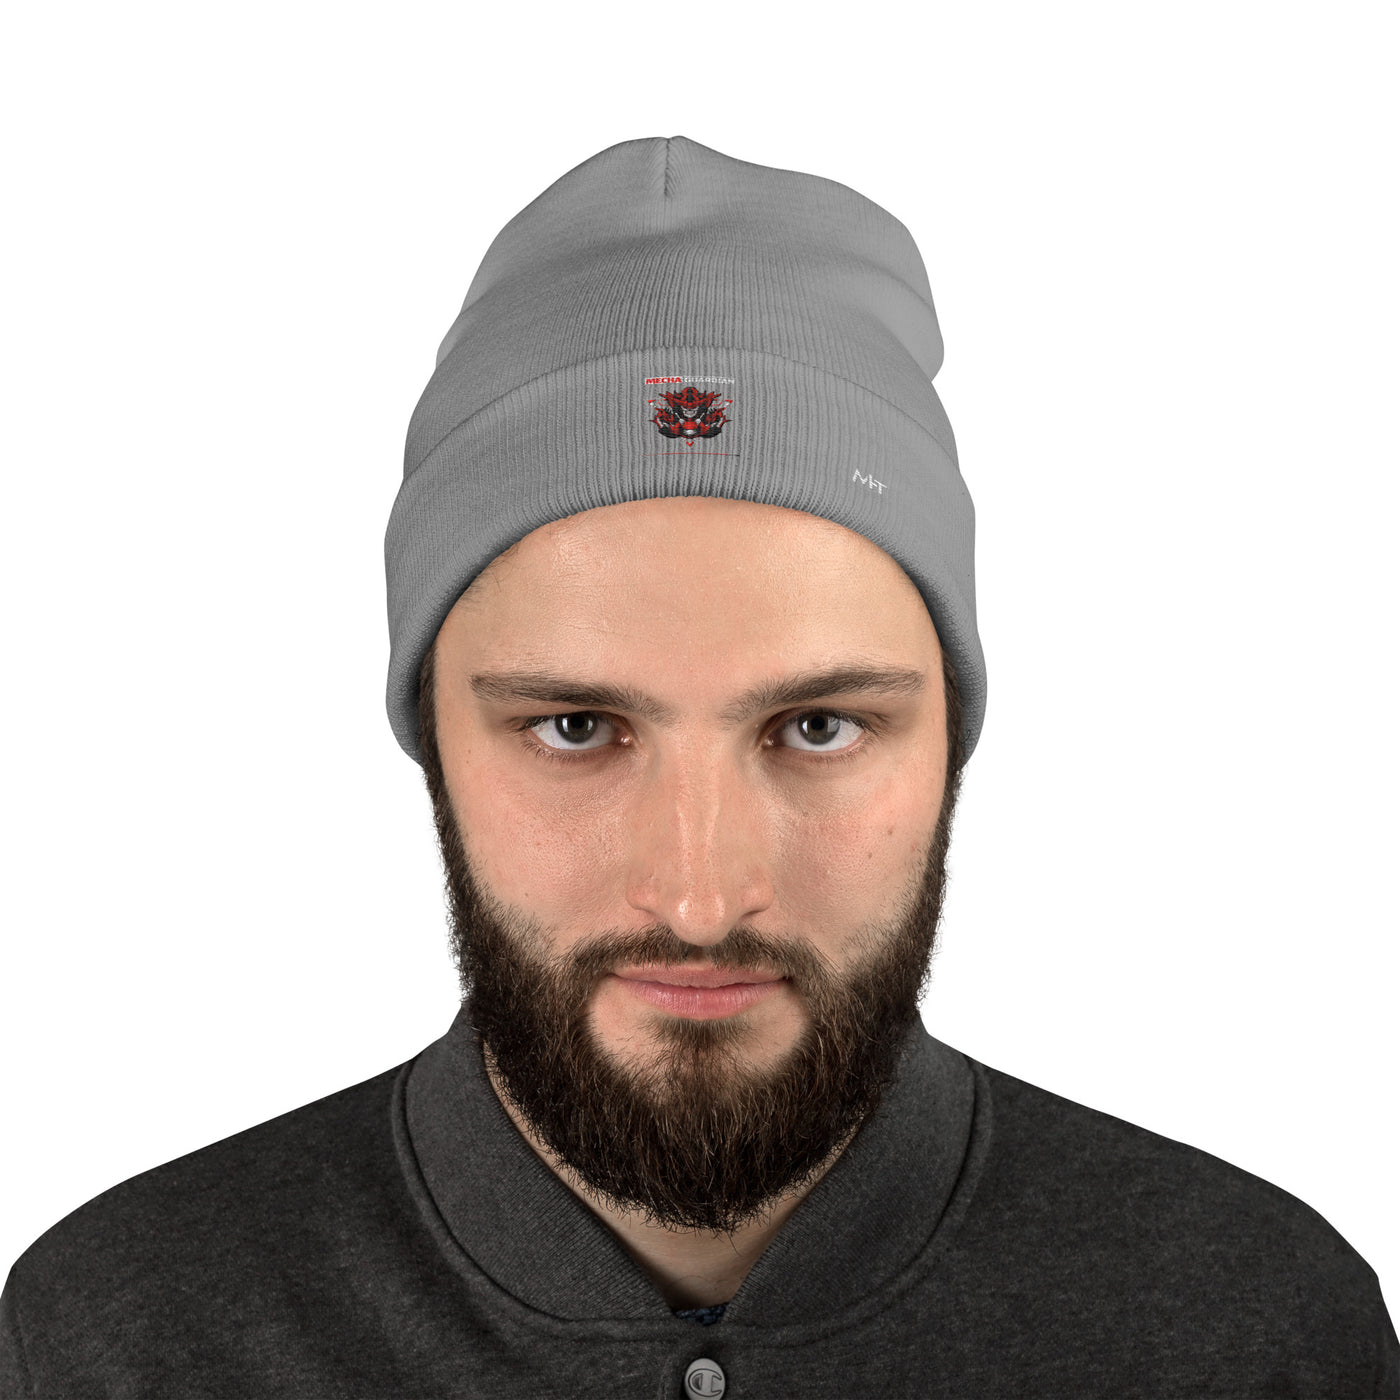 Red Mecha Guardian - Embroidered Beanie